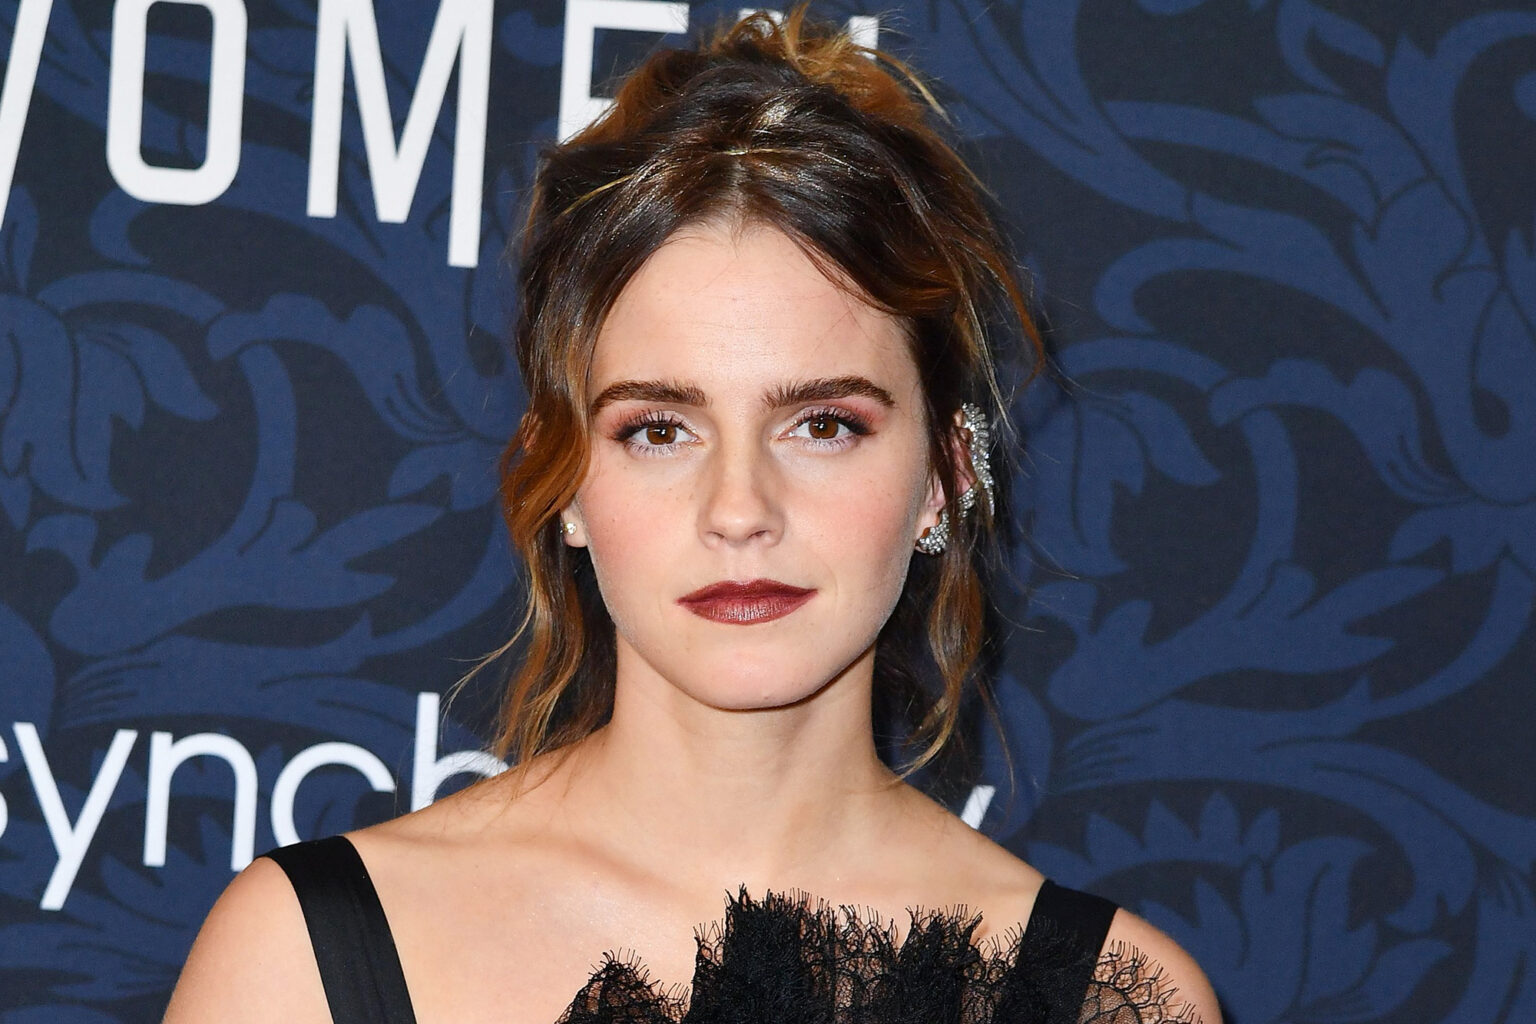 Fact check: 'Harry Potter' actress Emma Watson is going to continue acting, after all. Ten points for Gryffindor! What movies should cast her ASAP?